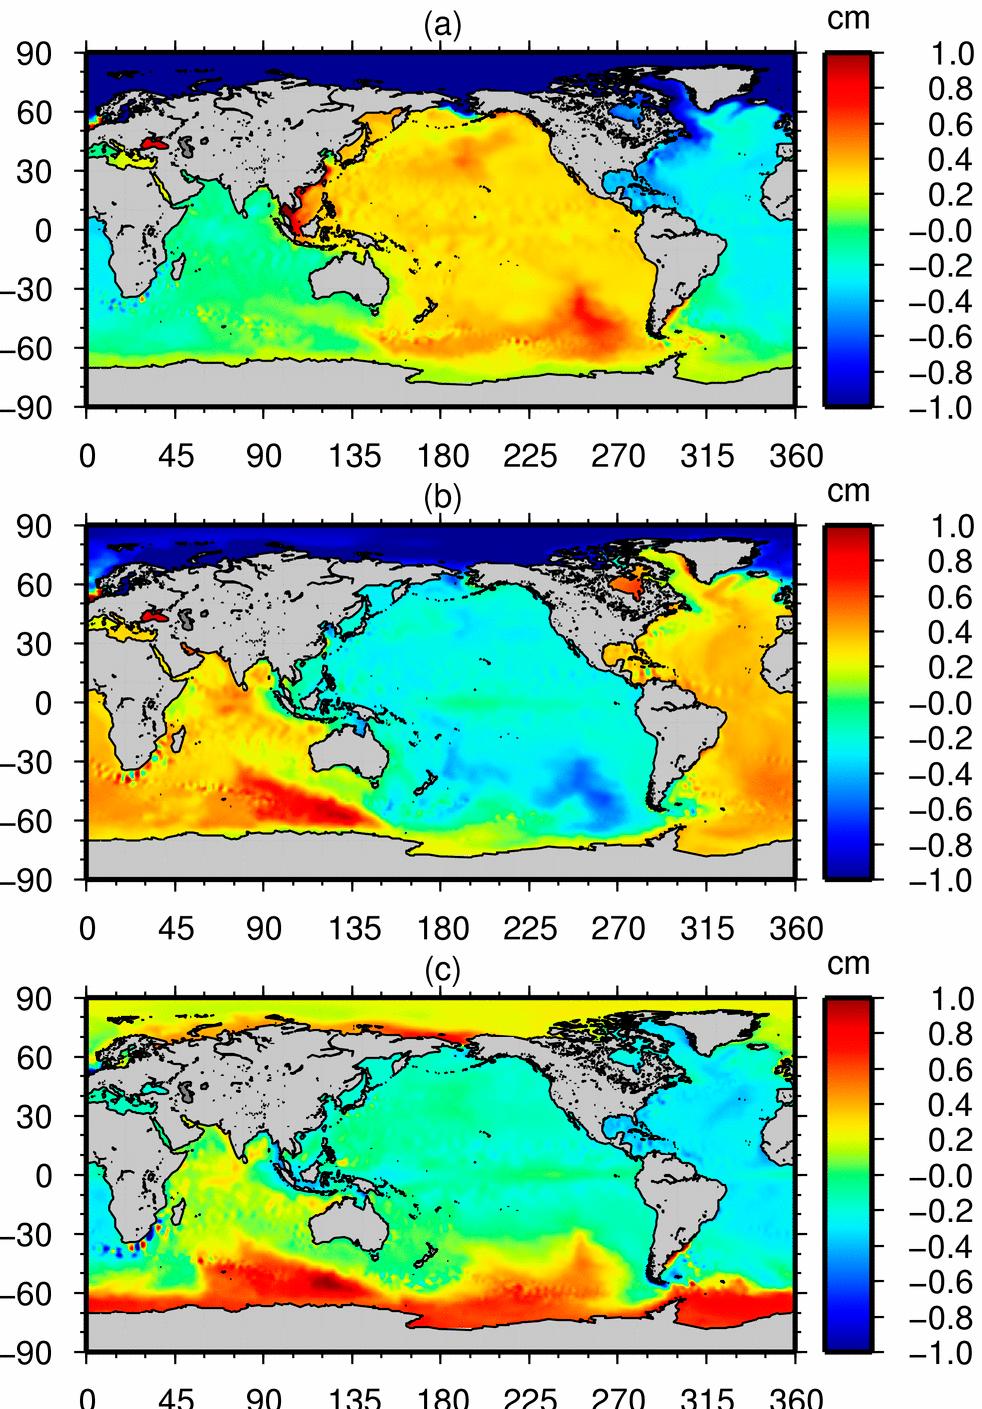 EOFs of high frequency (T<100days) bottom pressure and sea level variability BP EOF1 (22%)